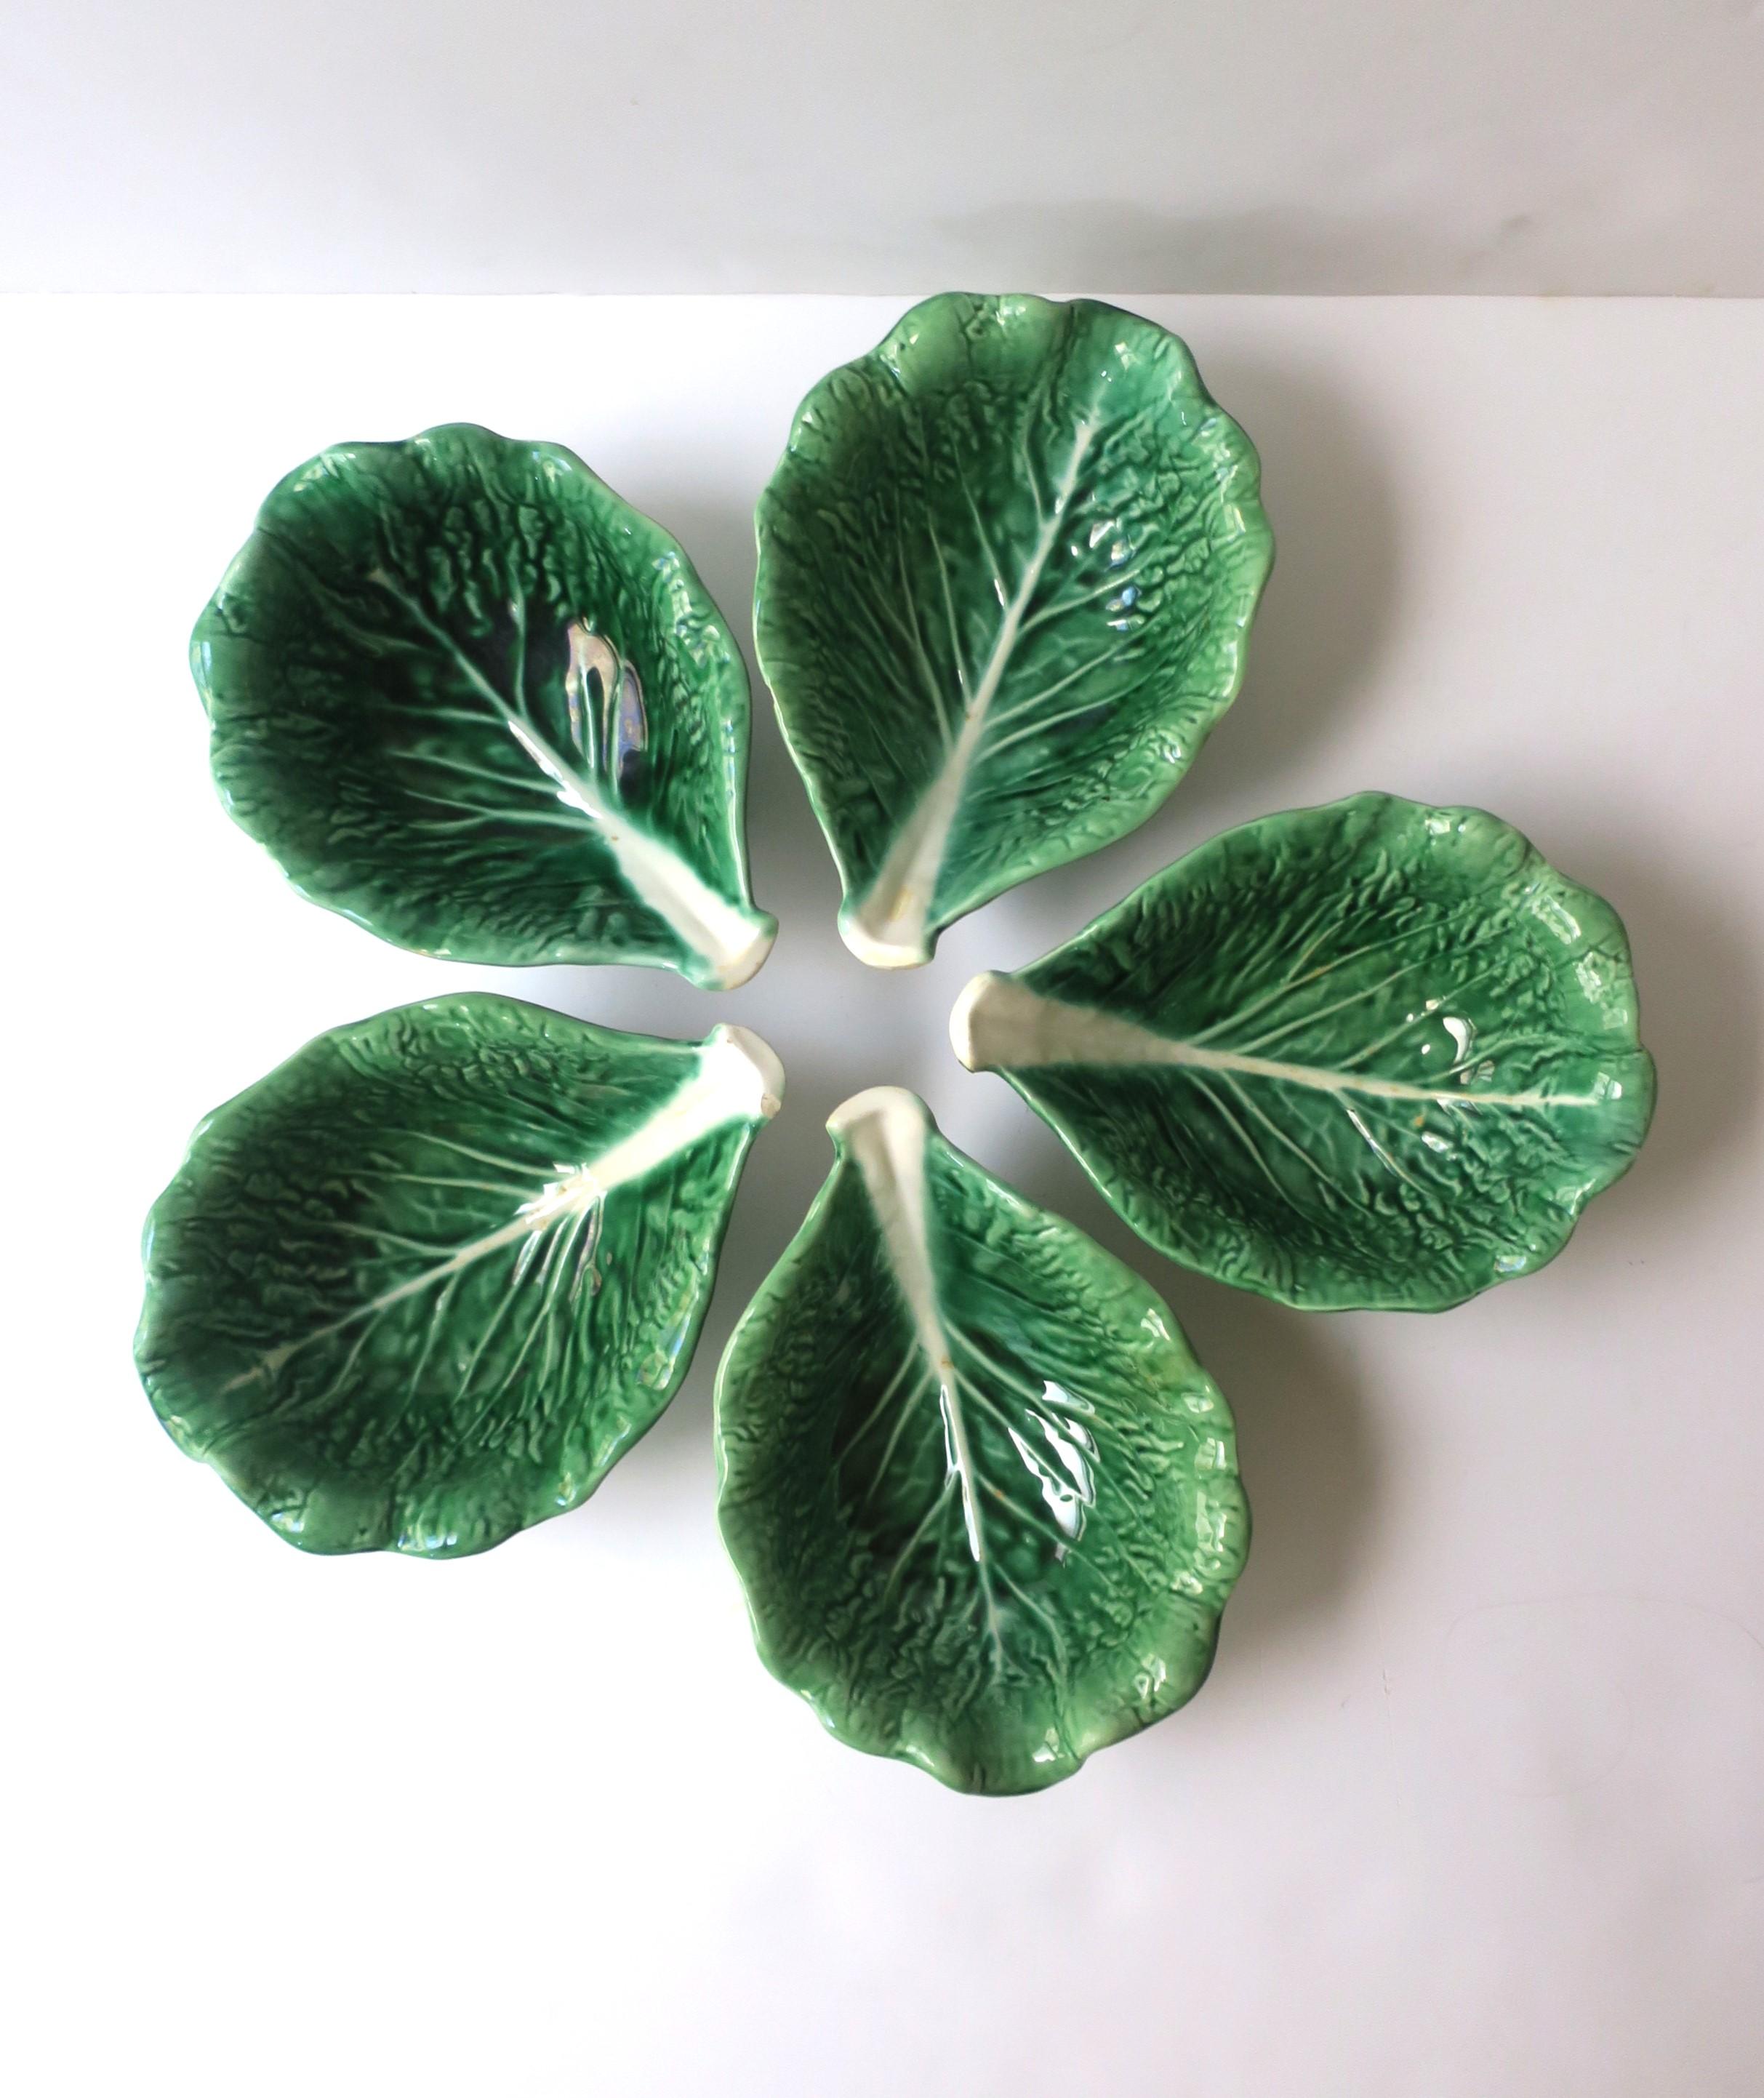 **There are five (5) green lettuce bowls available, each sold separately, as per listing. 

A vintage green and white lettuce or cabbage leaf serving or dip bowl, in the Palm Beach and Trompe l'Oeil styles, circa late-20th century, Portugal. A great